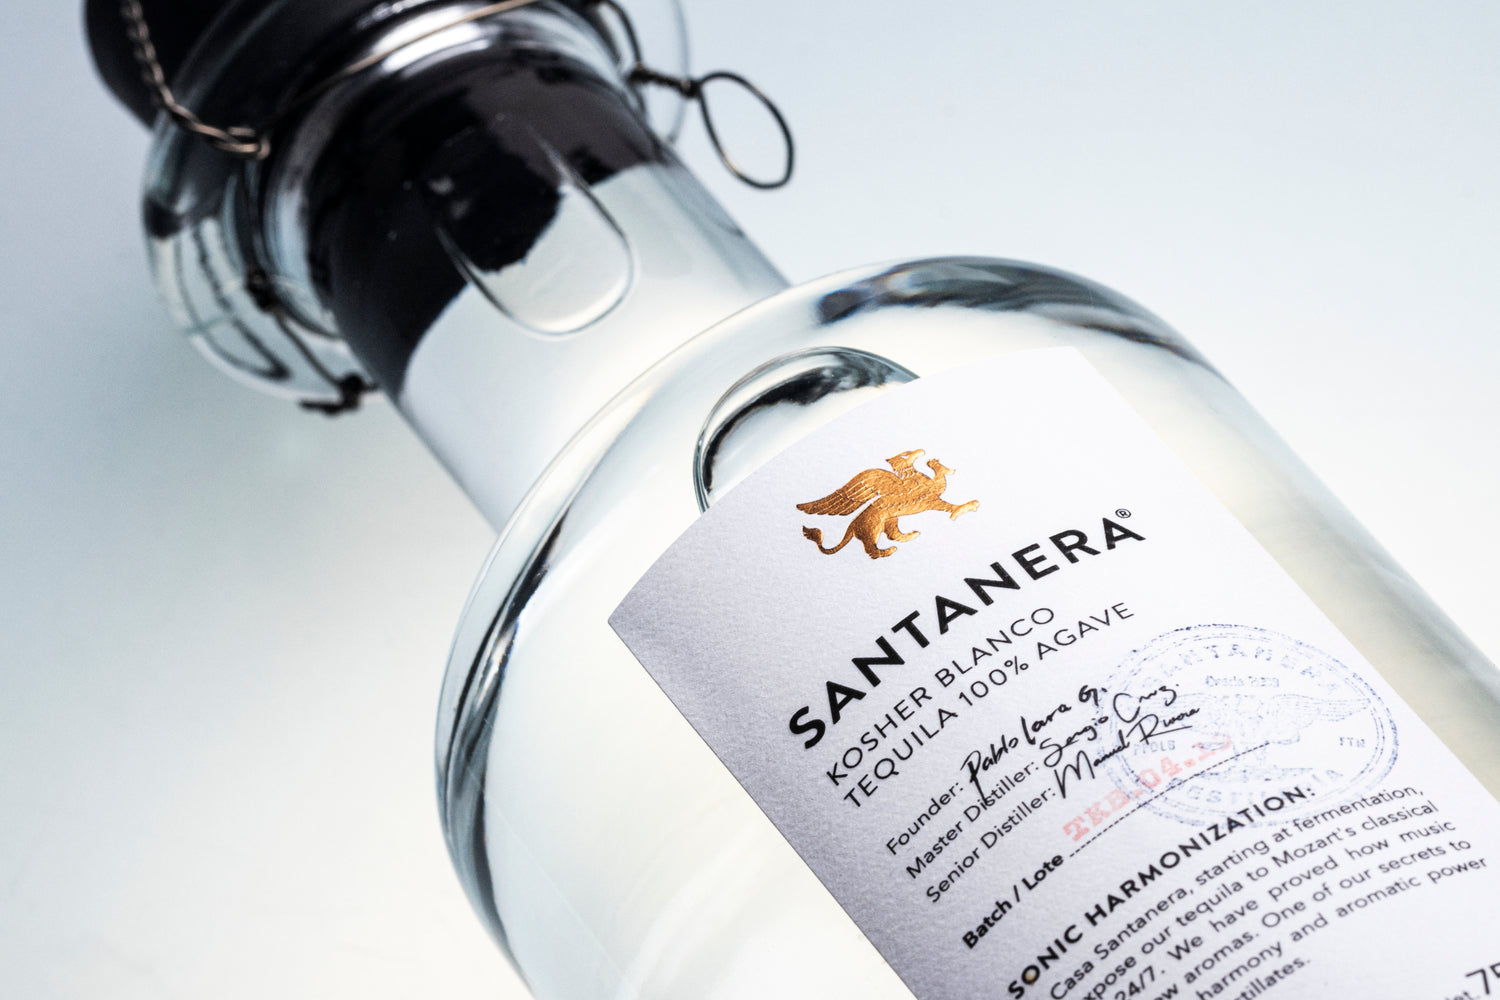 SANTANERA TEQUILA | ICONIC BEVERAGES